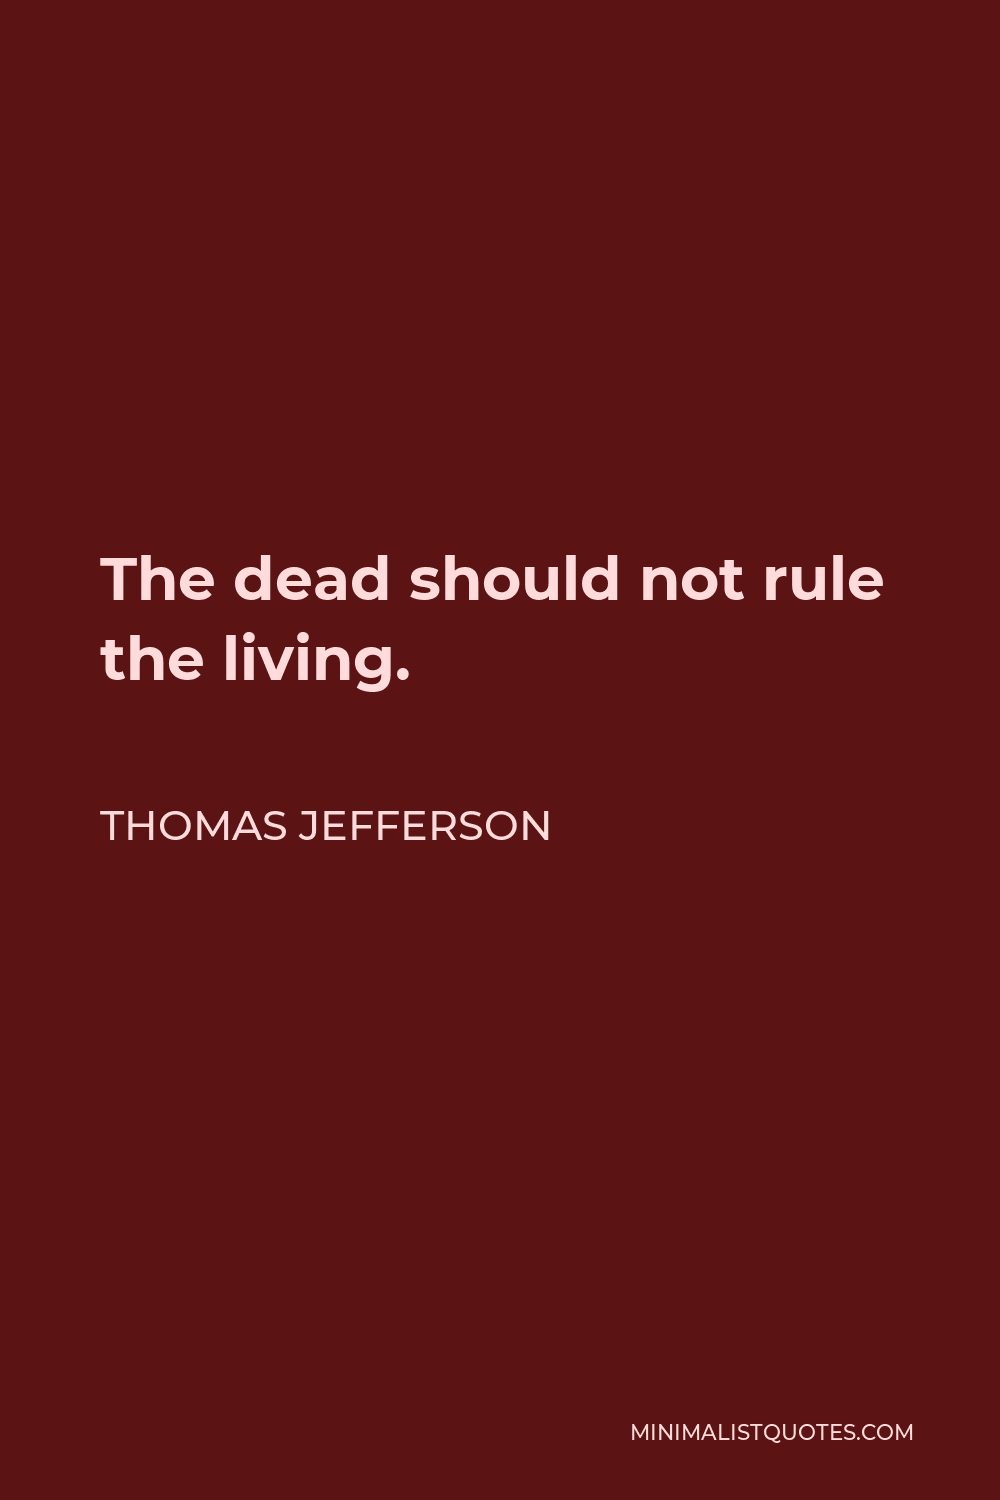 Thomas Jefferson Quote - The dead should not rule the living.